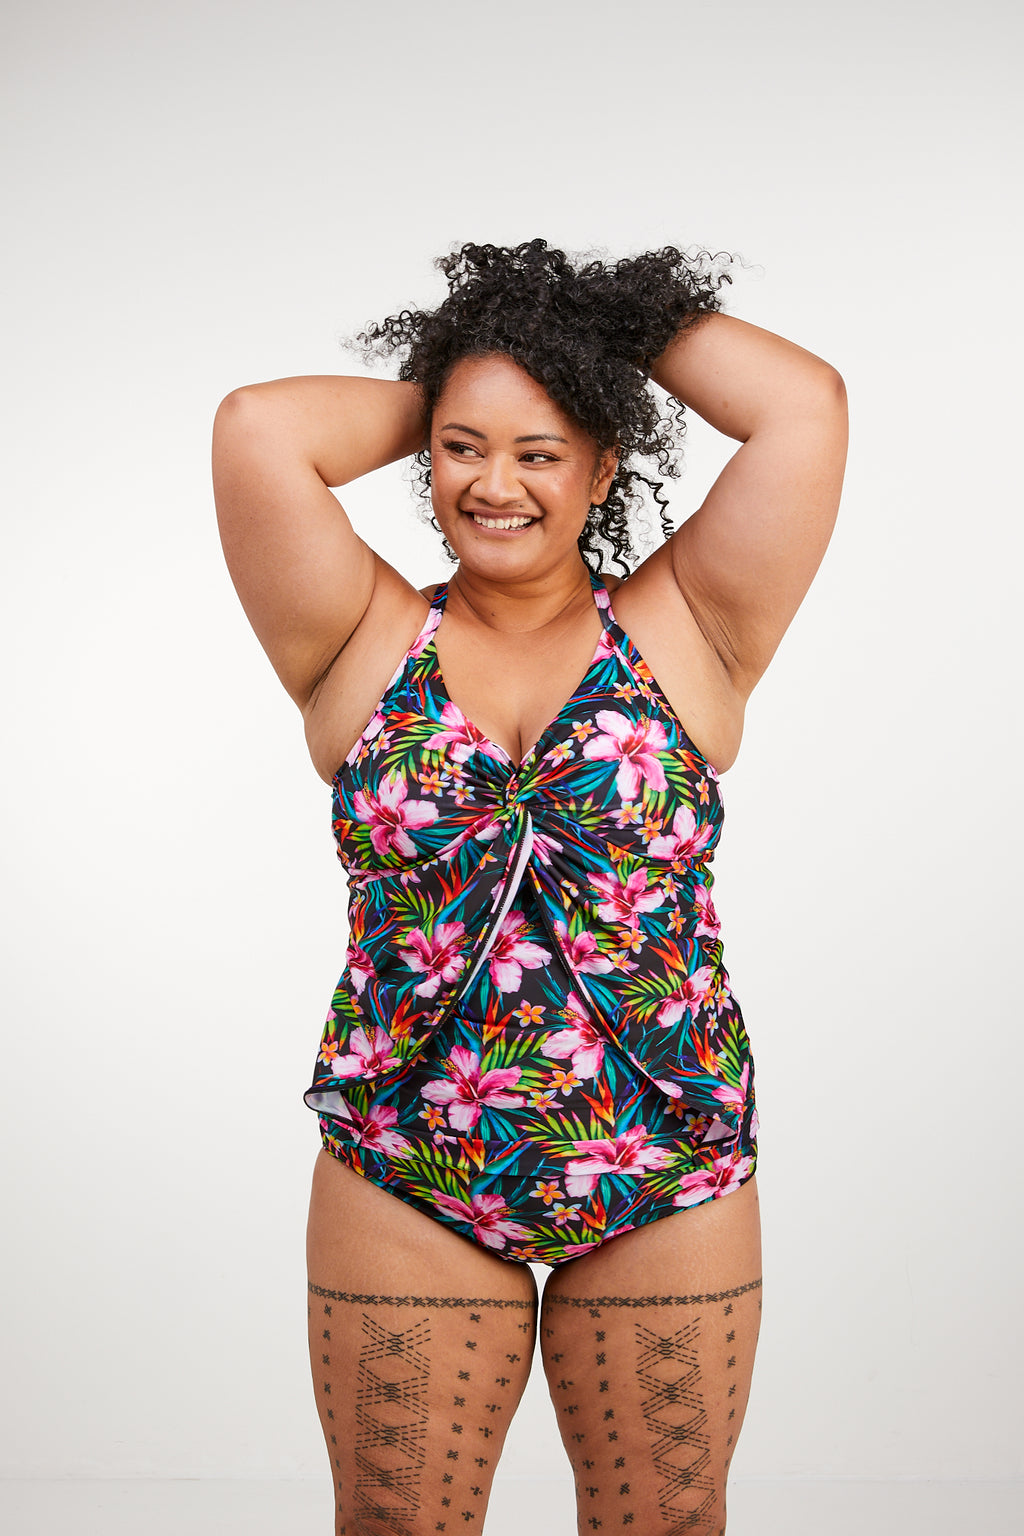 Swimsuits For Large Busts: 2019 Reviews Wardrobe Oxygen, 49% OFF